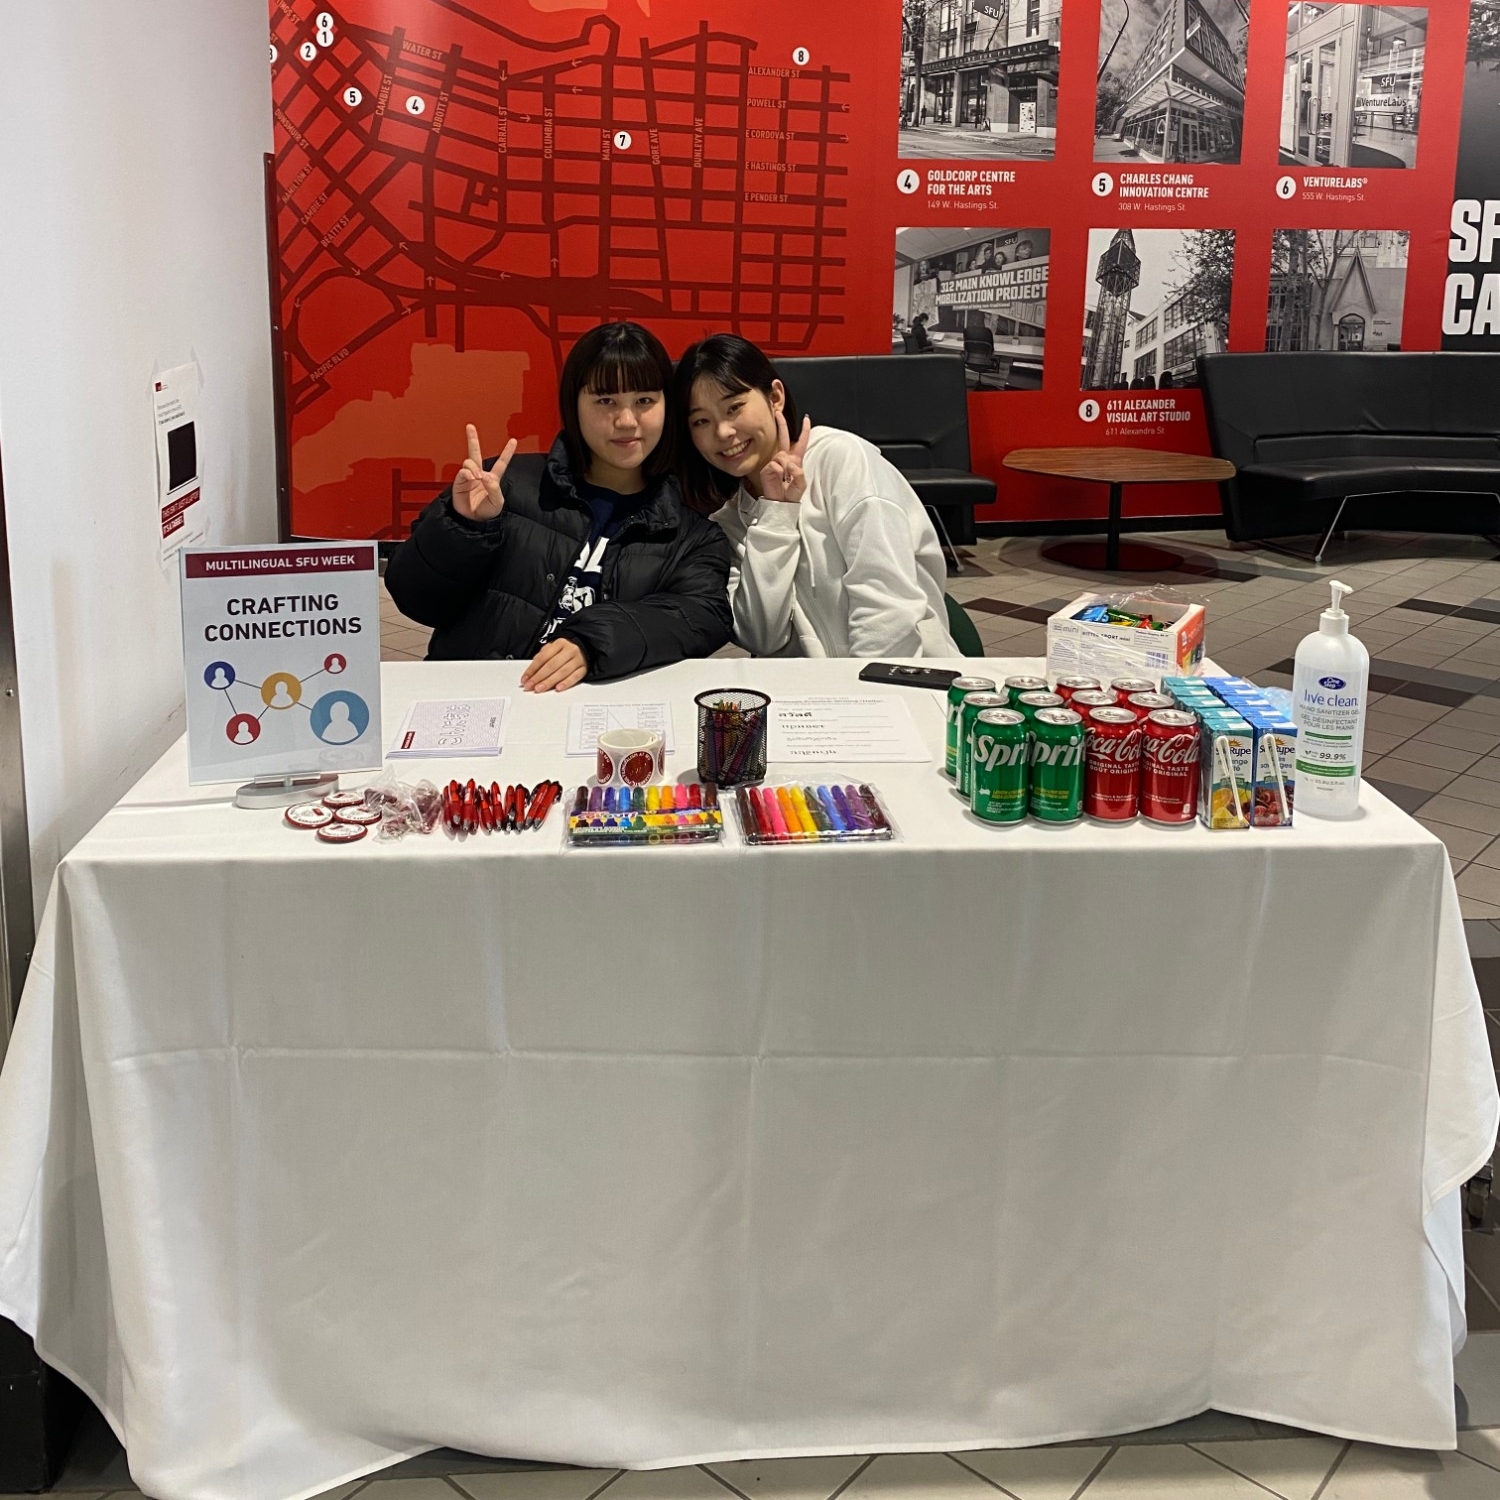 Two students sitting at a table and giving away snacks and prizes as part of a crafting connections activity for Multilingual Week 2023 at Vancouver campus